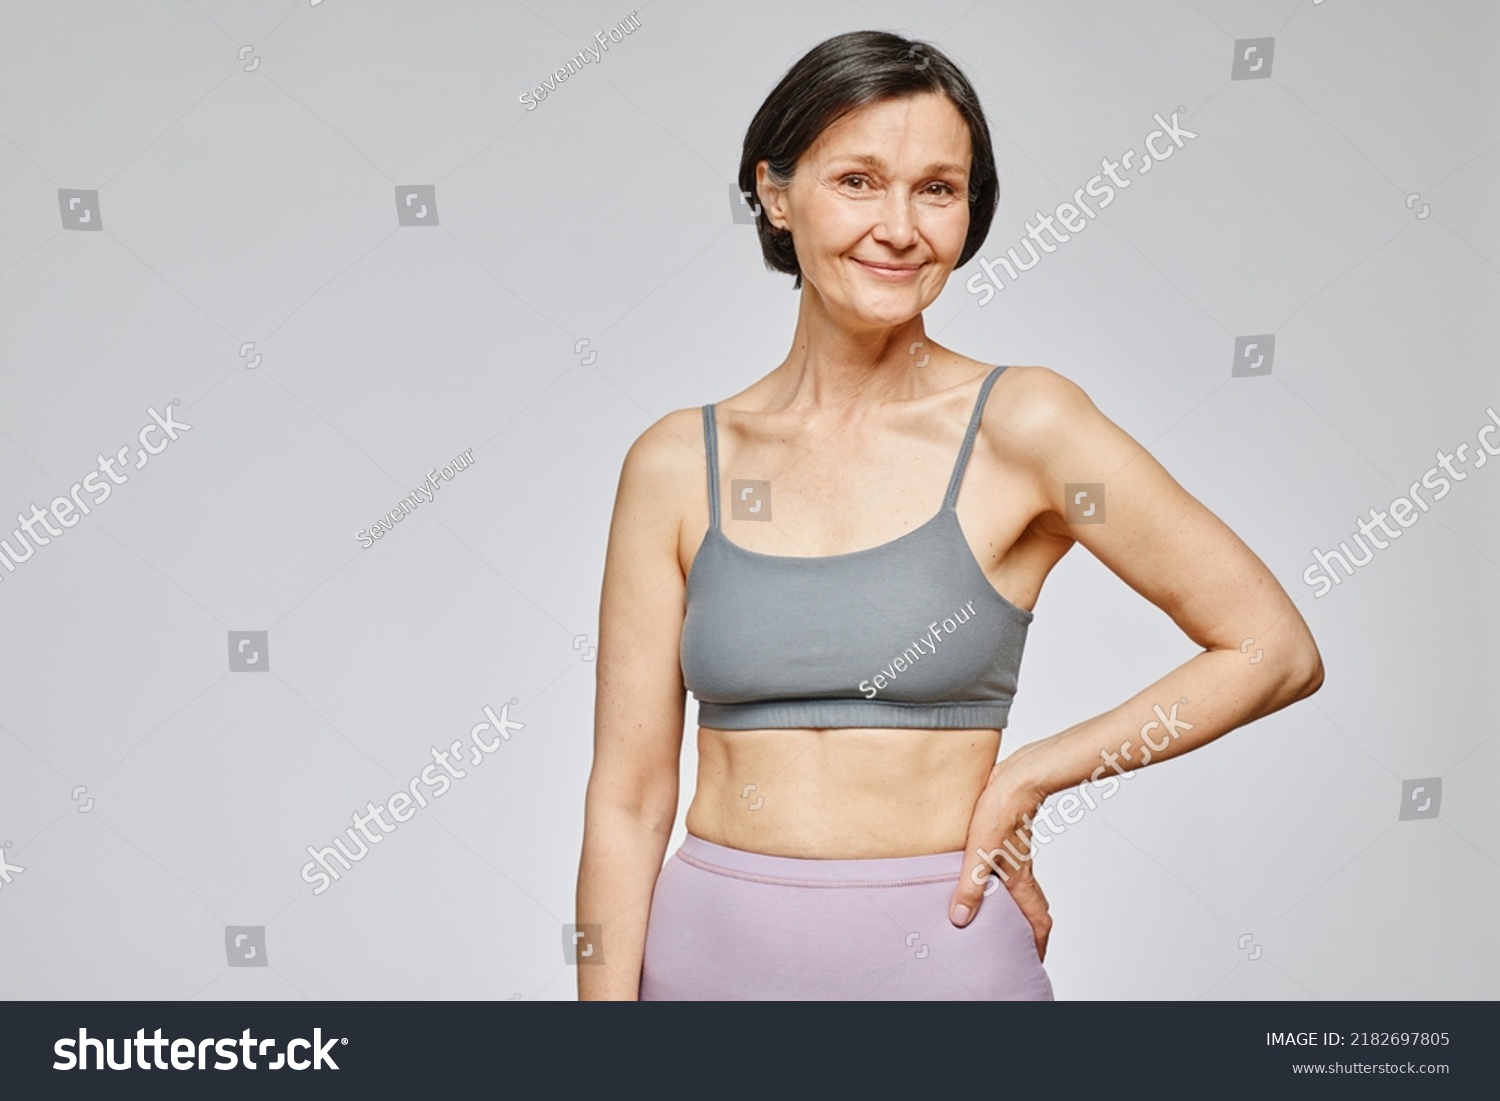 Minimal waist up portrait of smiling mature woman wearing neutral underwear against grey background, body positivity concept, copy space #2182697805